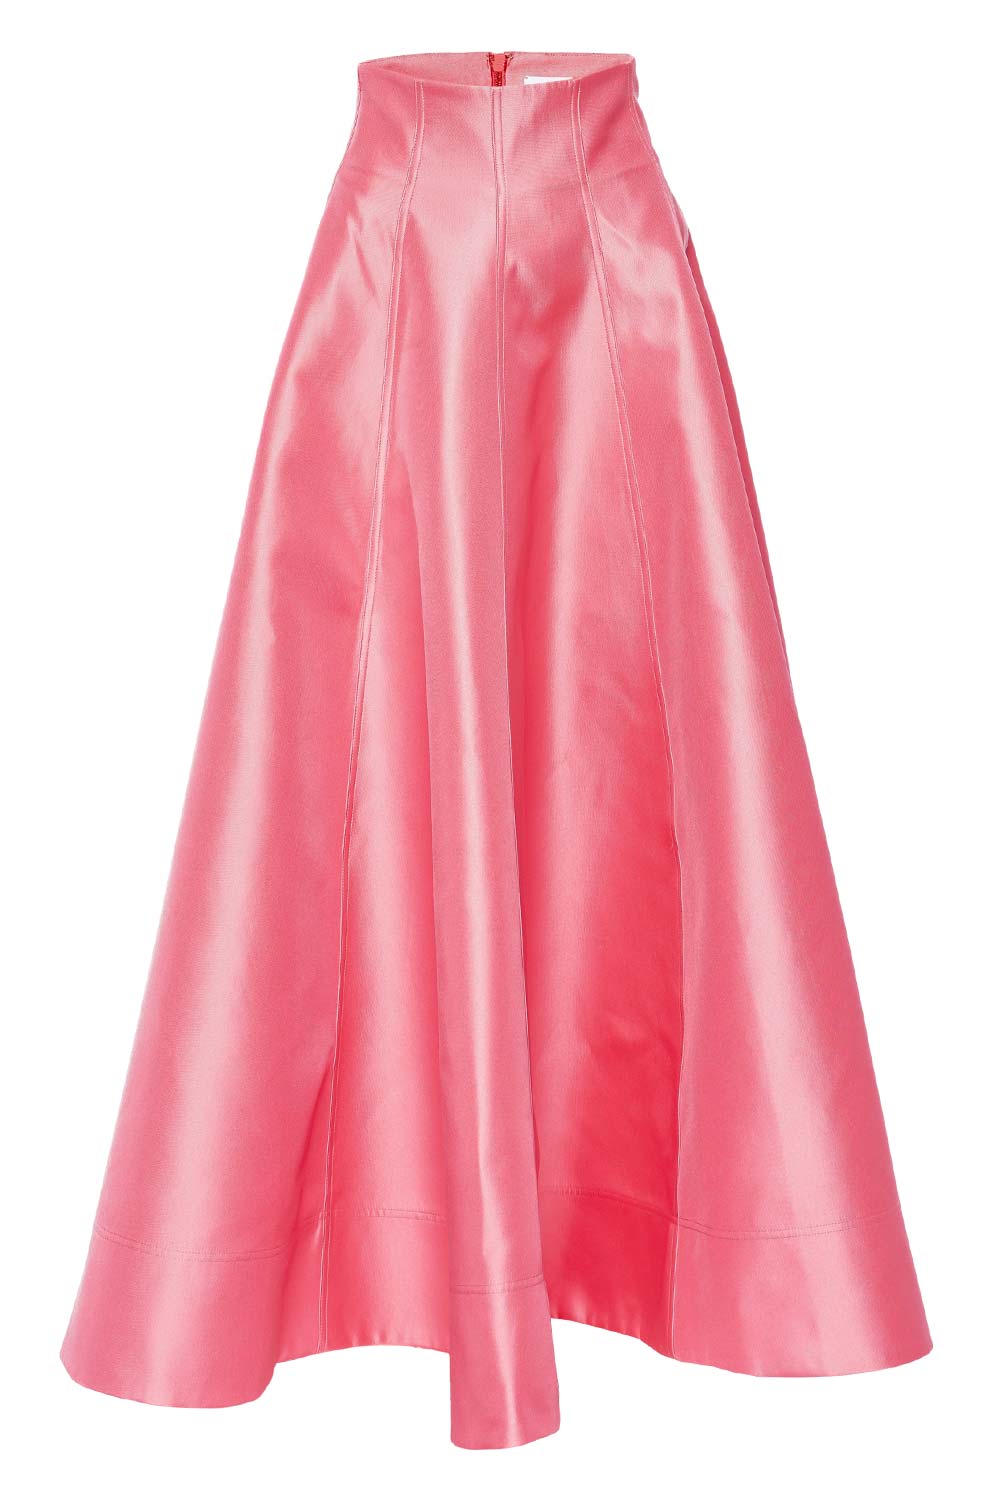 Acler Isla Pink Bonded Maxi Skirt